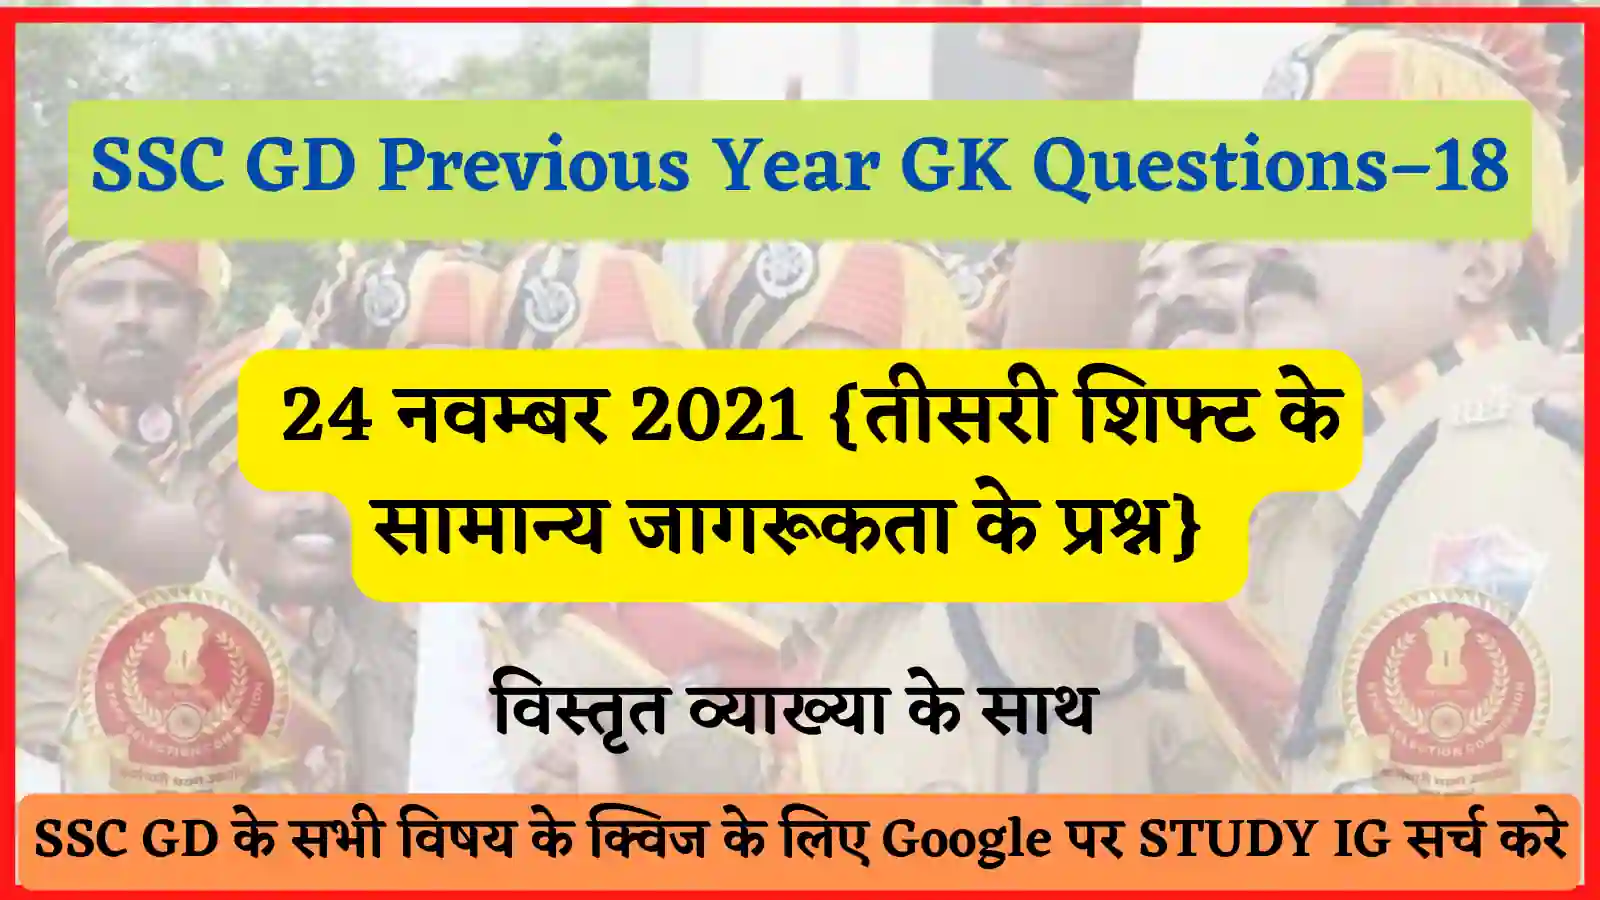 SSC GD Previous Year GK Questions / Quiz - 18